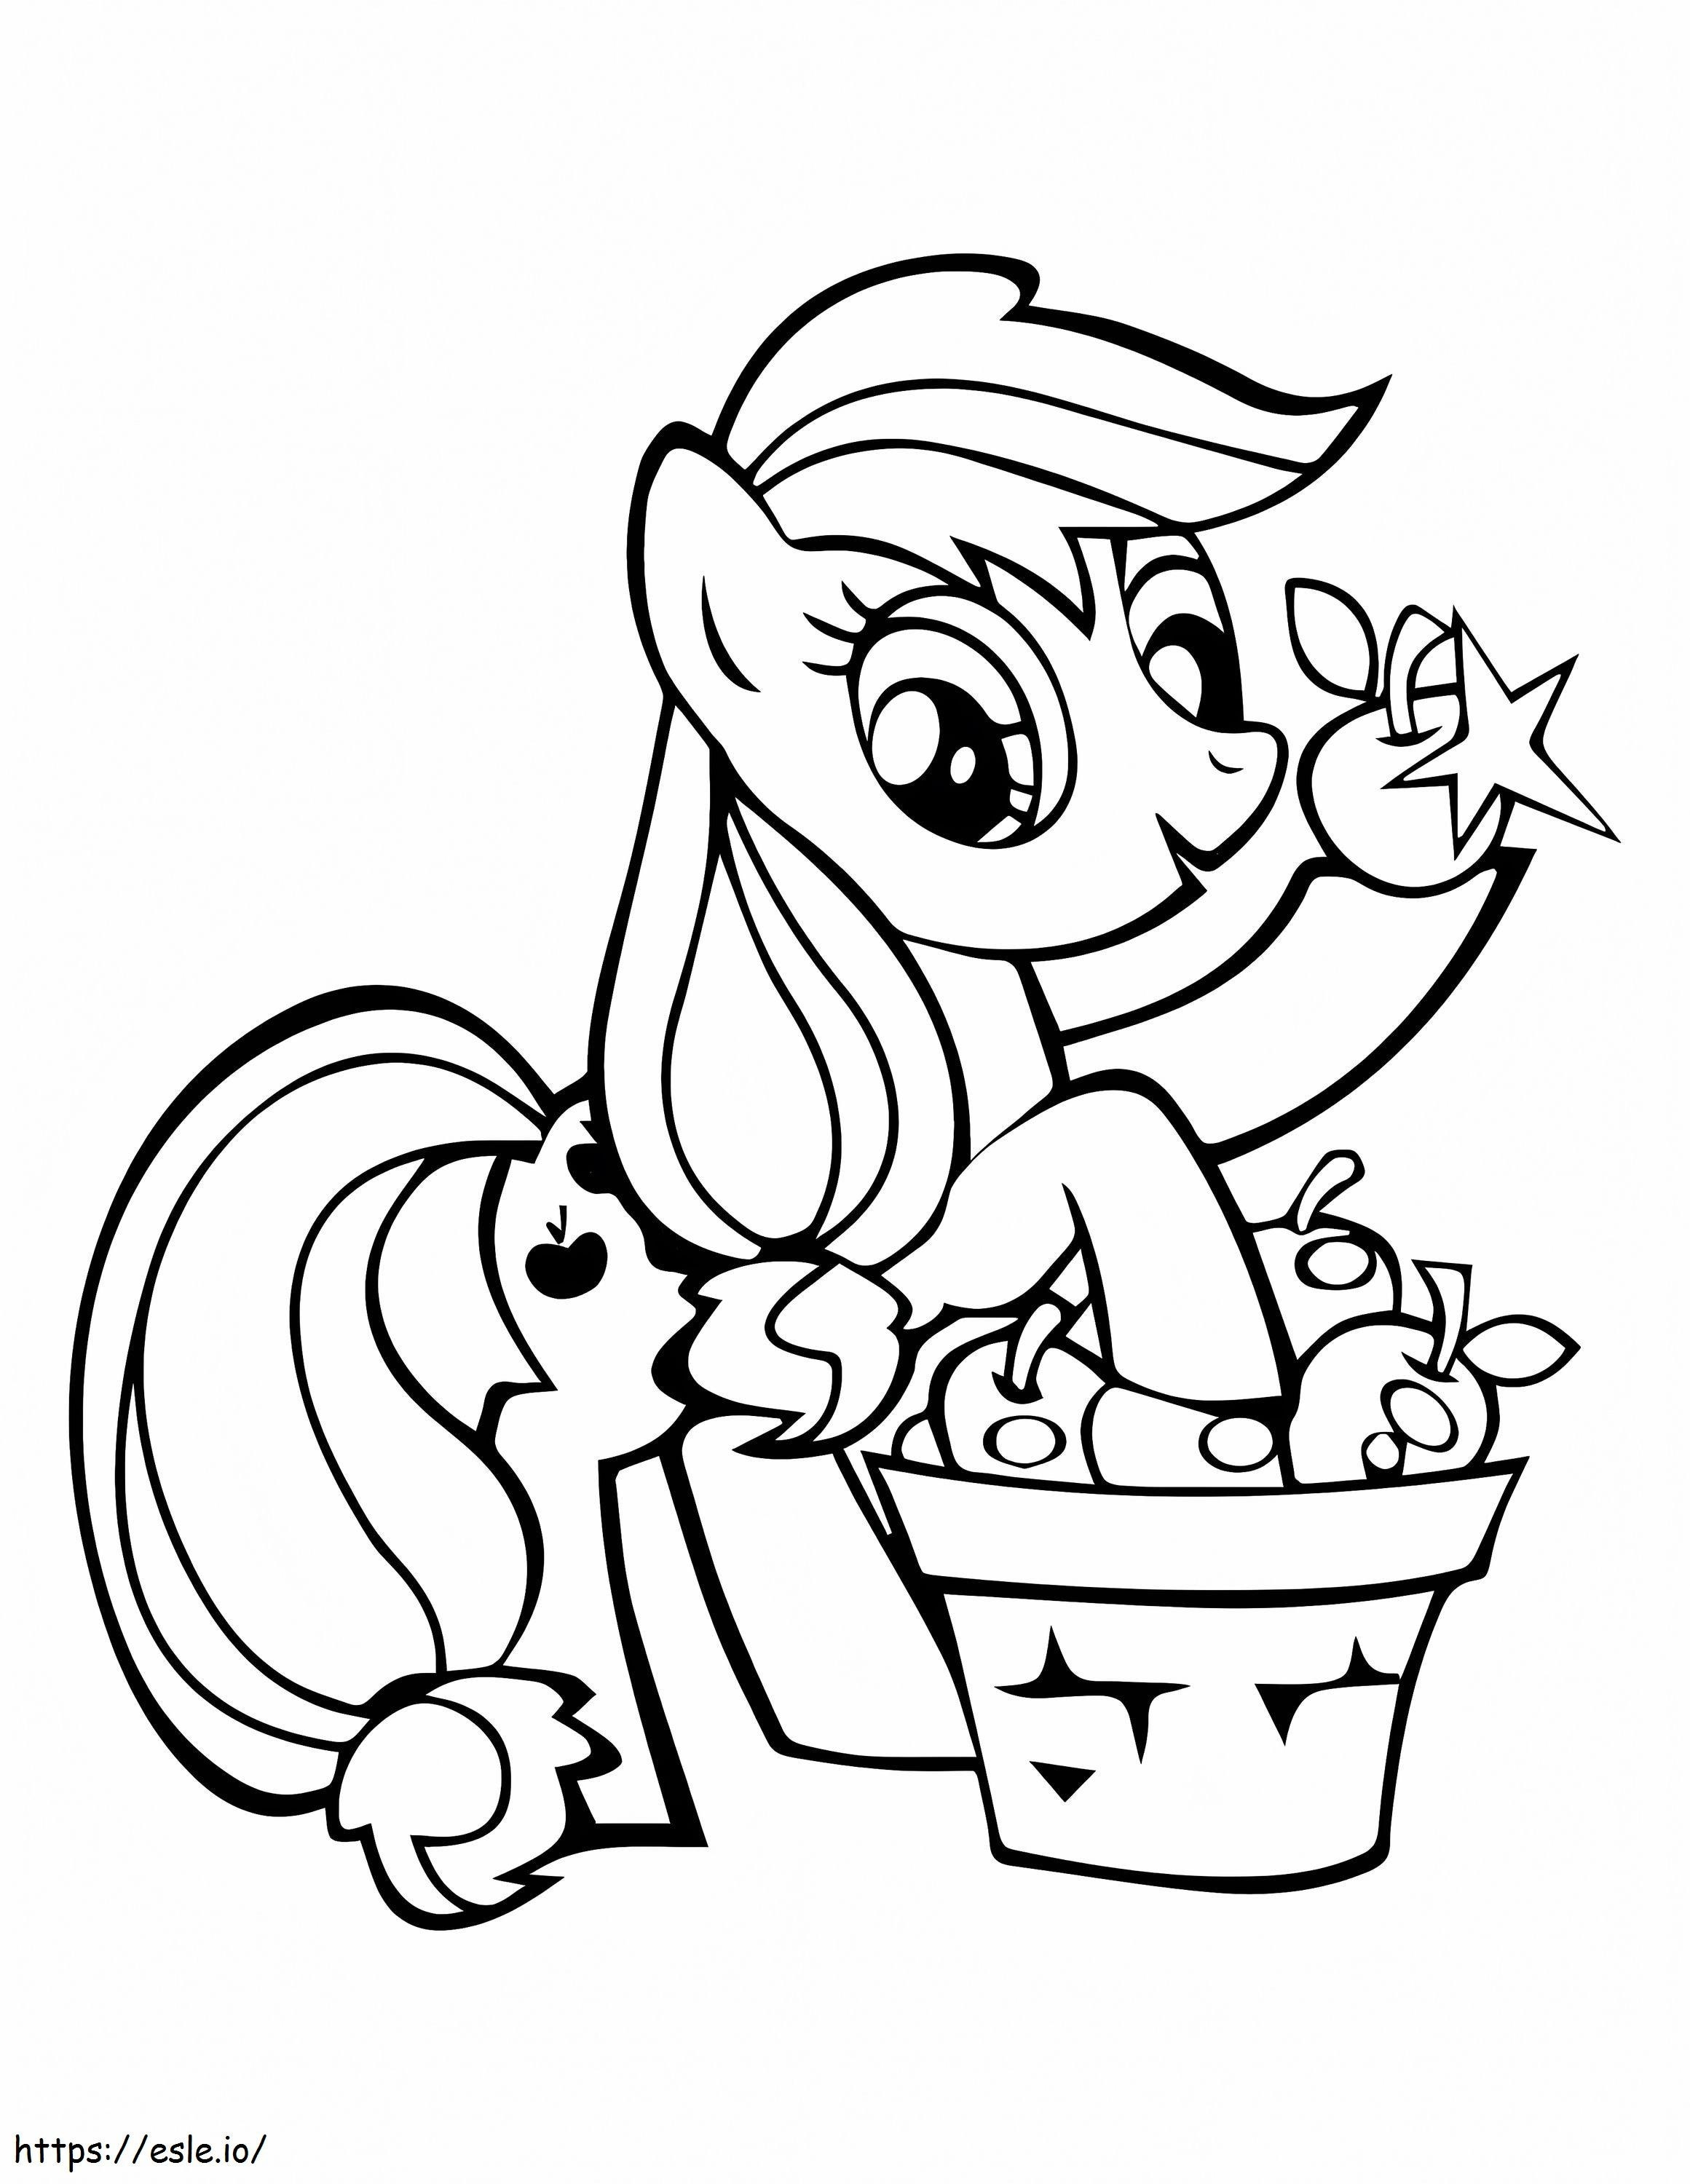 Applejack And Apples coloring page